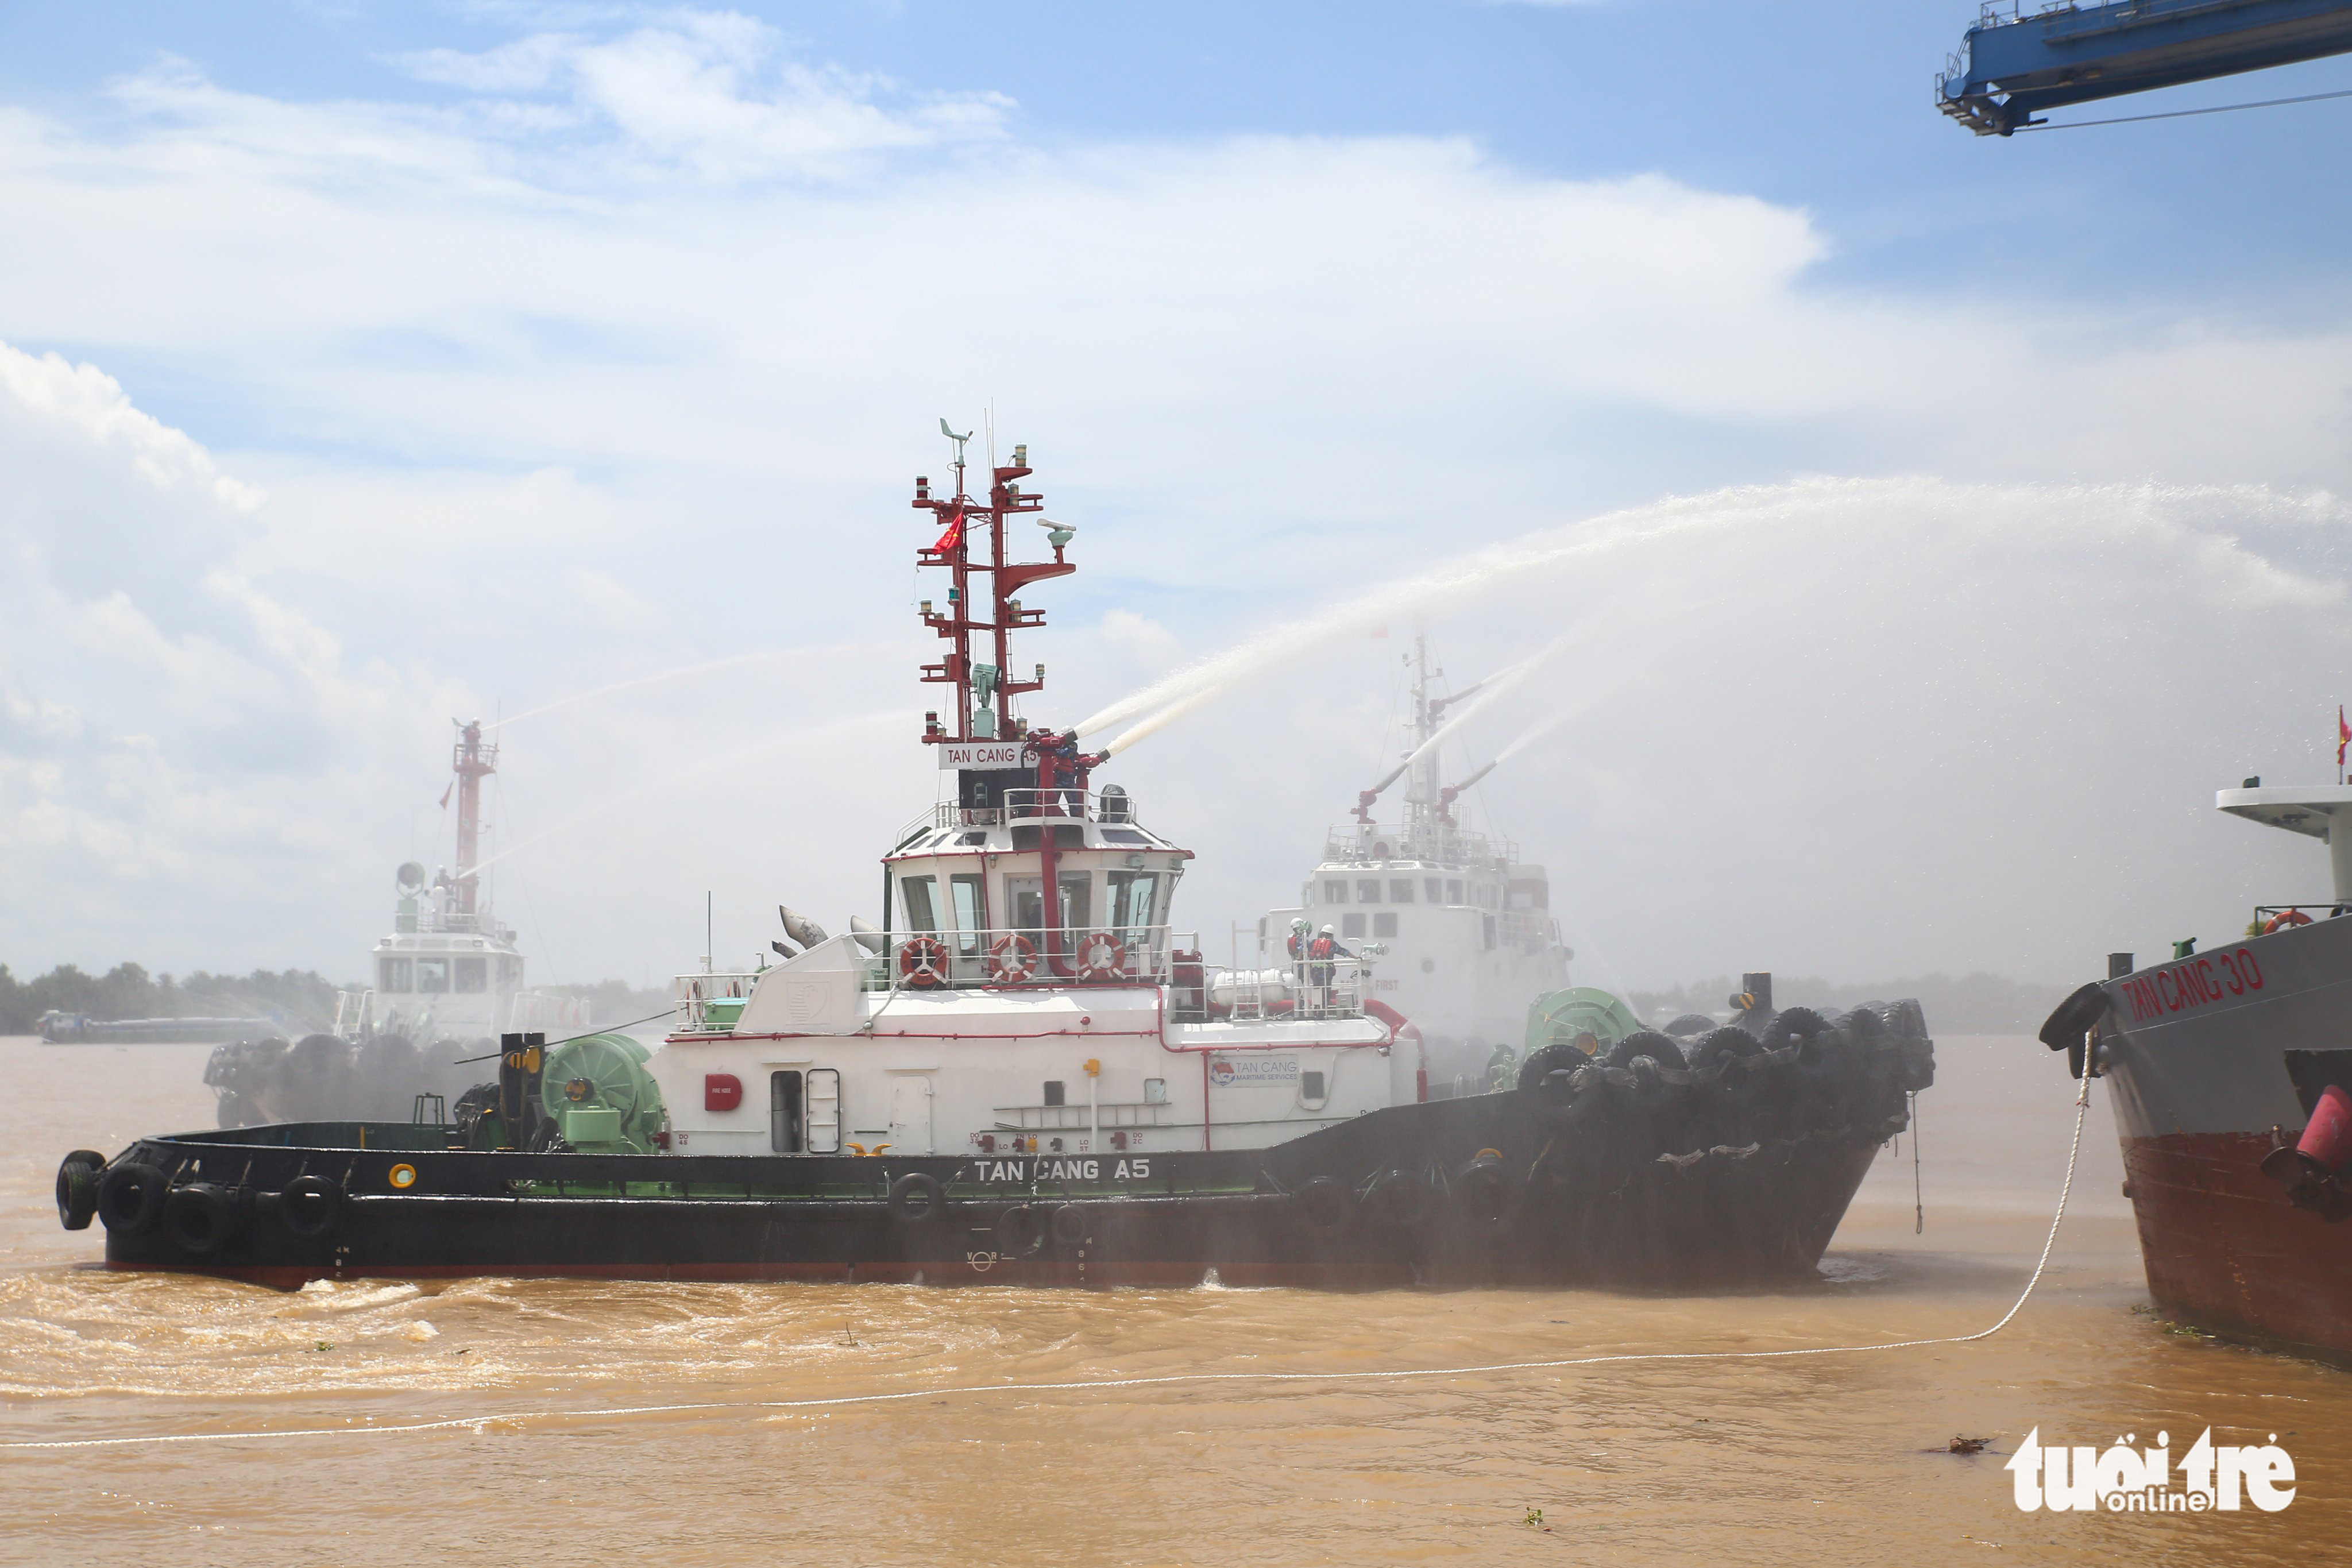 A specialized ship is used during the fire drill at Cat Lai Port in Ho Chi Minh City, September 24, 2022. Photo: Le An / Tuoi Tre